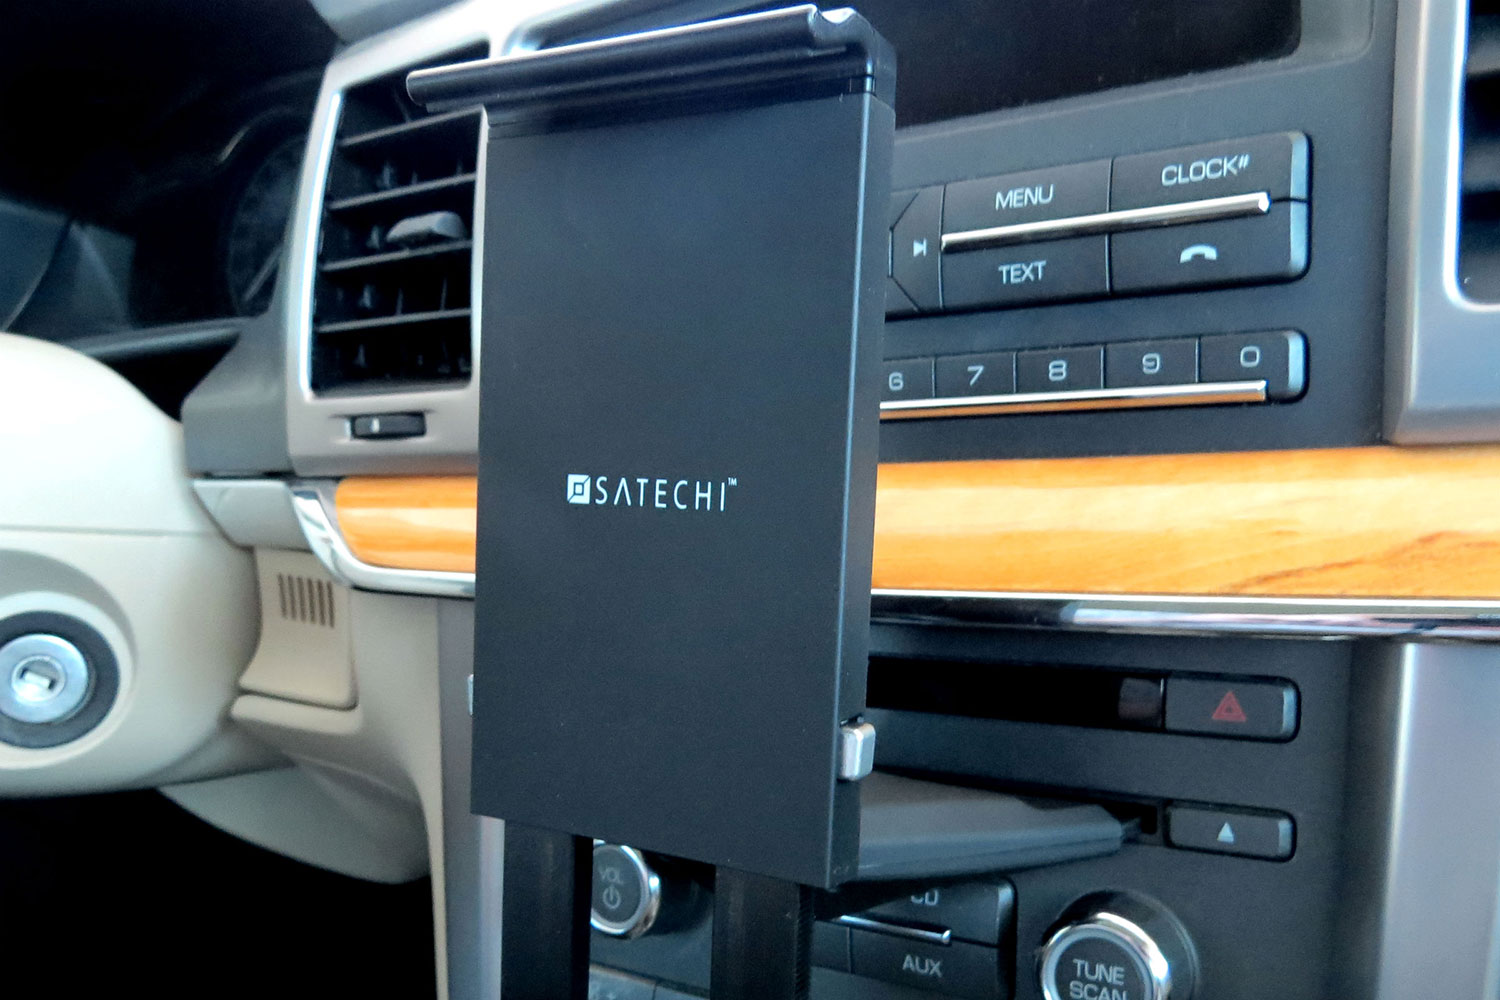 hands on satechi car mounts and accessories universal smartphone tablet cd slot dock